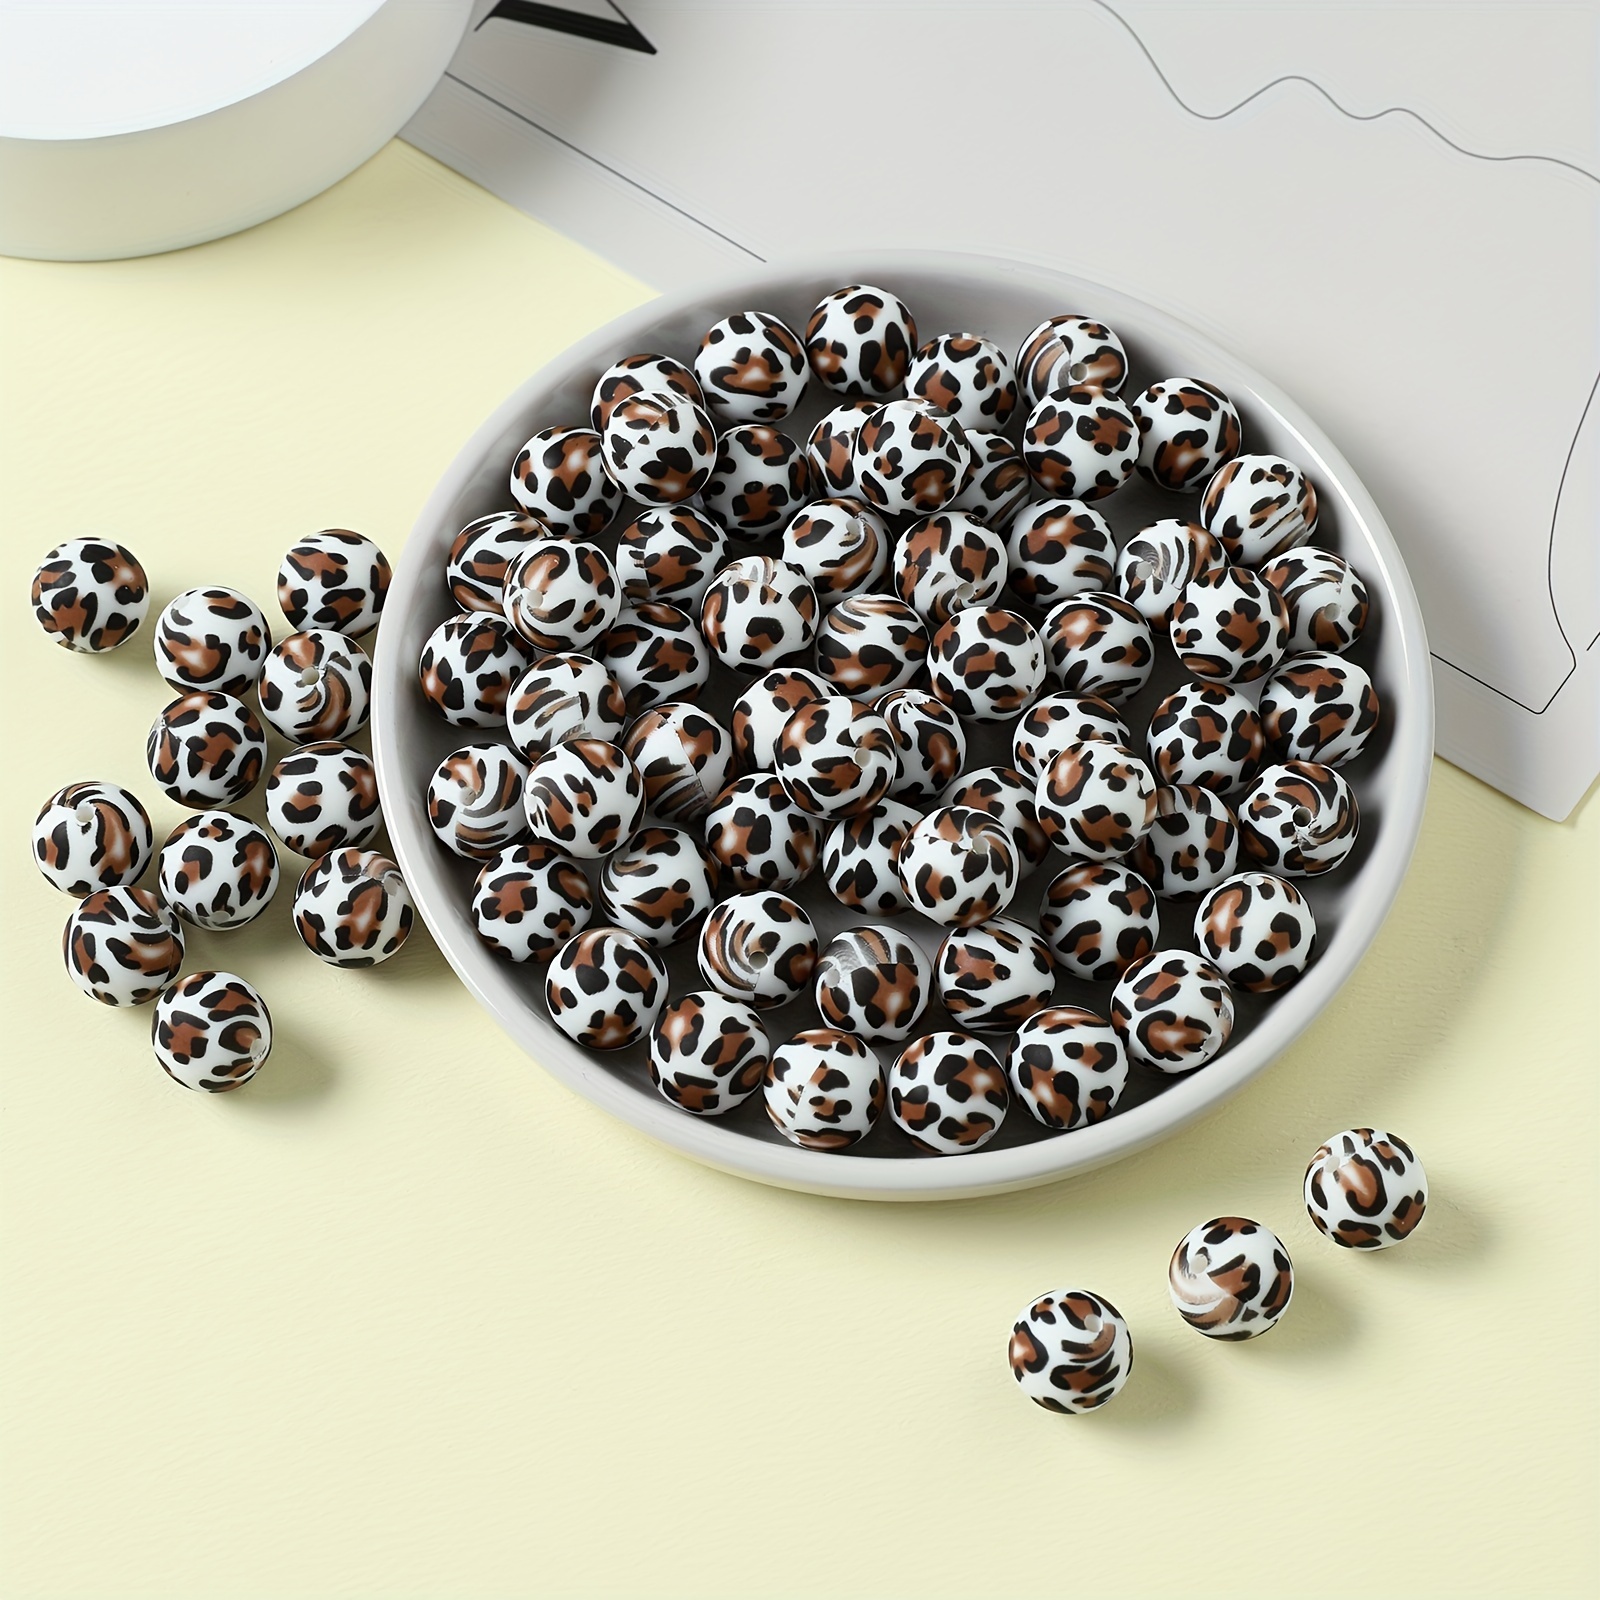 

50pcs Leopard Print Silicone Beads 15mm - Fashionable Round Animal Pattern Beads For Diy Keychains, Bracelets & Necklaces Crafting